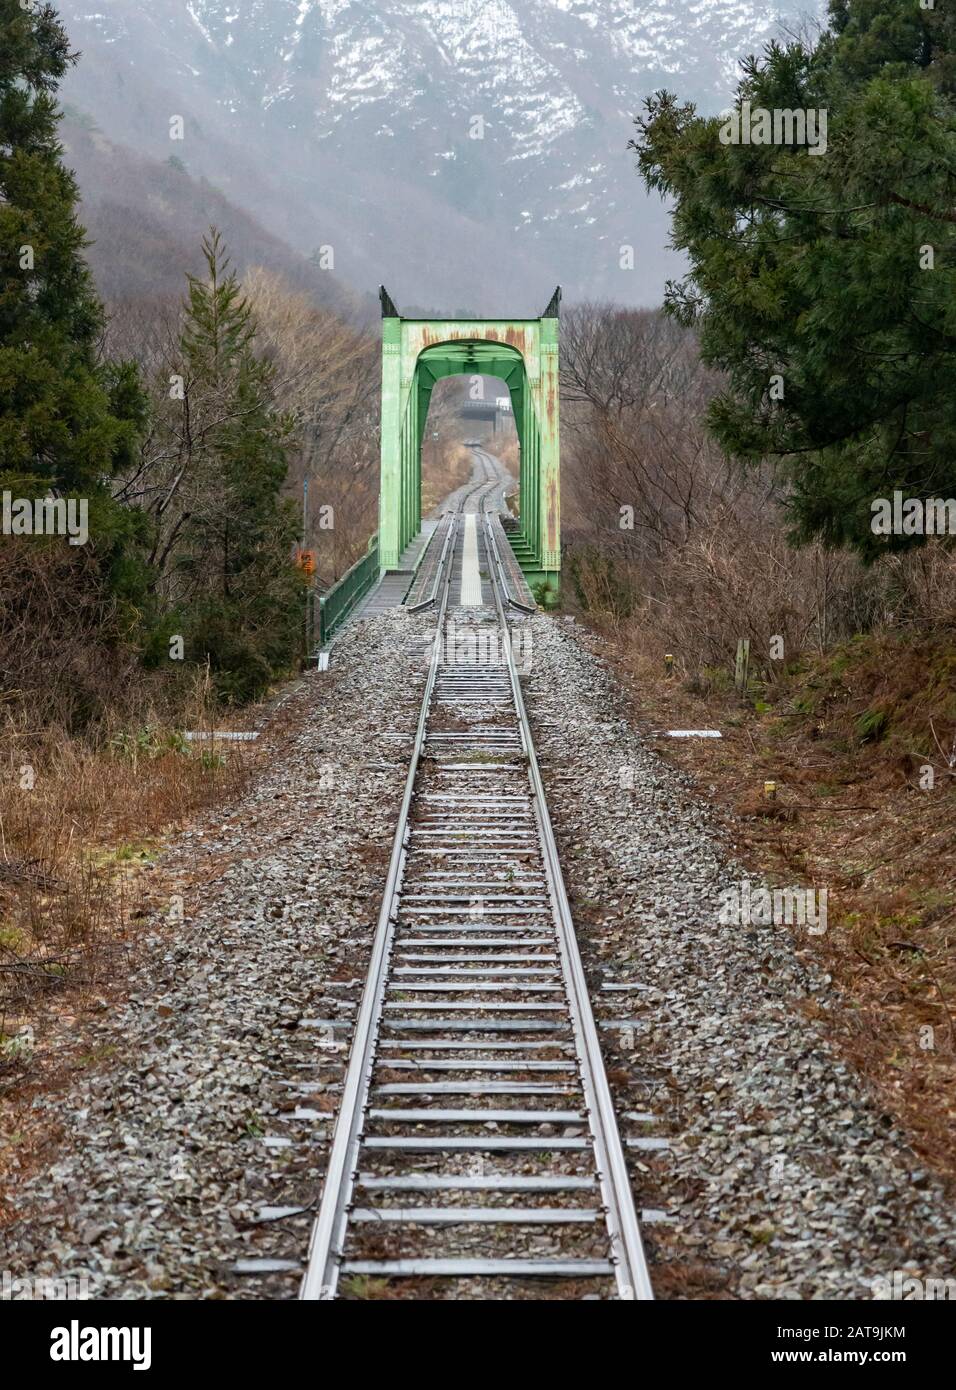 A bridge and tracks seen from a train on the JR East Yonesaka Line in Yamagata Prefecture, Japan. Stock Photo